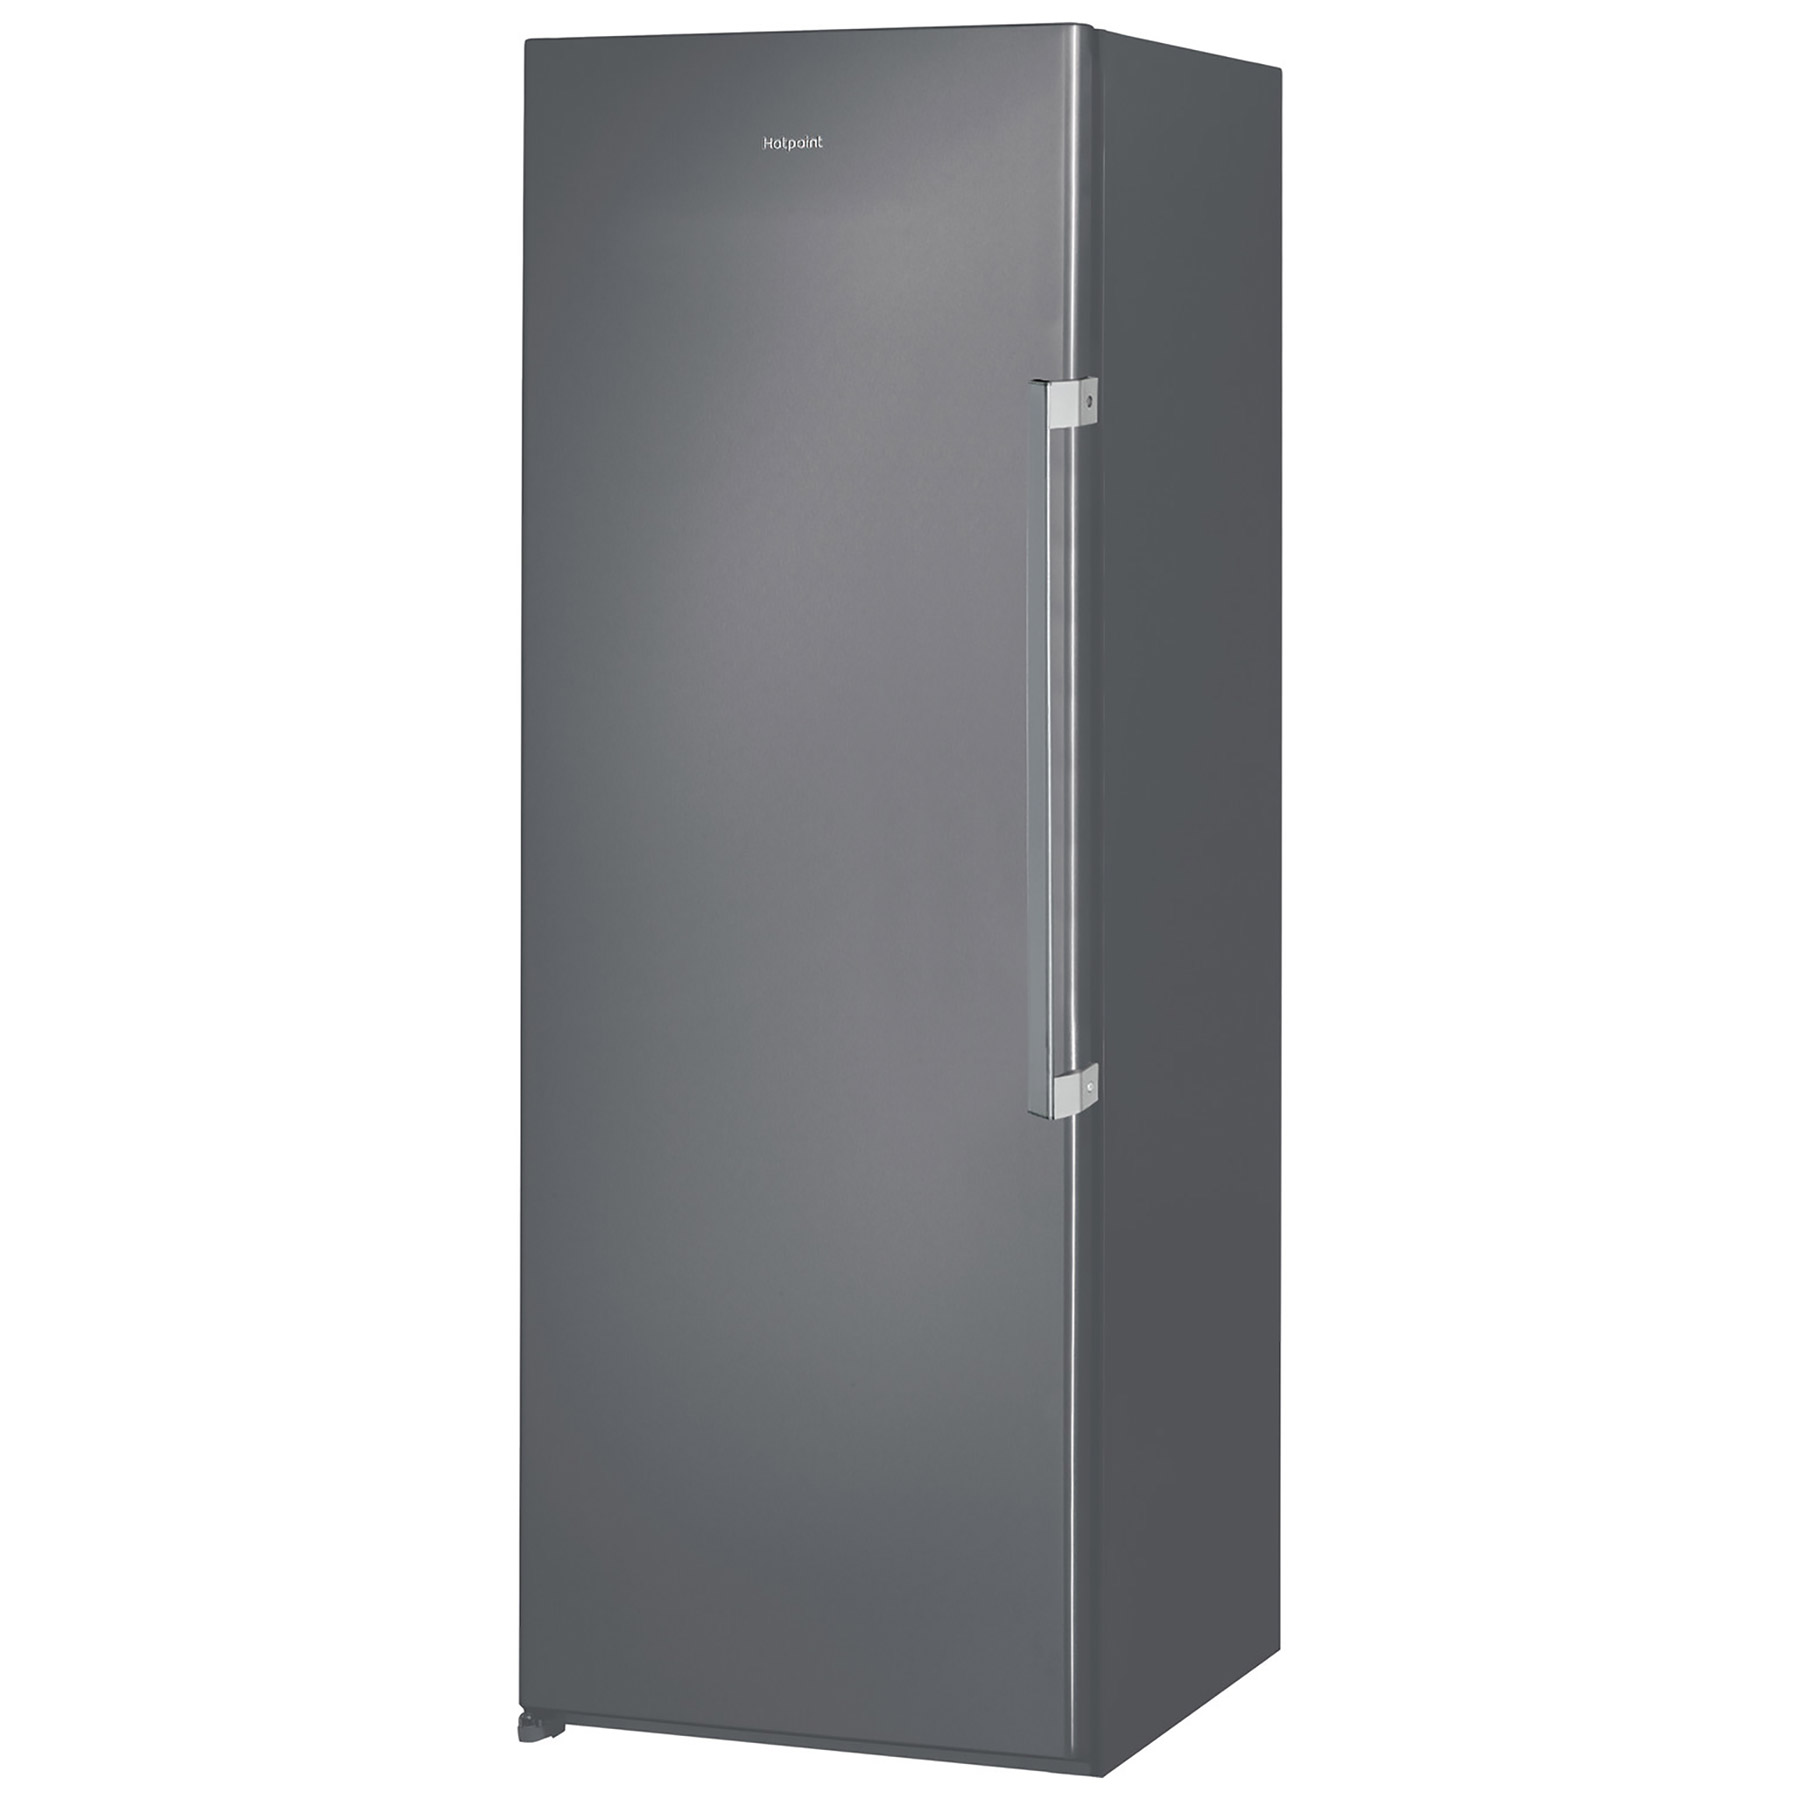 Image of Hotpoint UH6F1CG 1 60cm Tall Frost Free Freezer in Graphite 1 67m F Ra